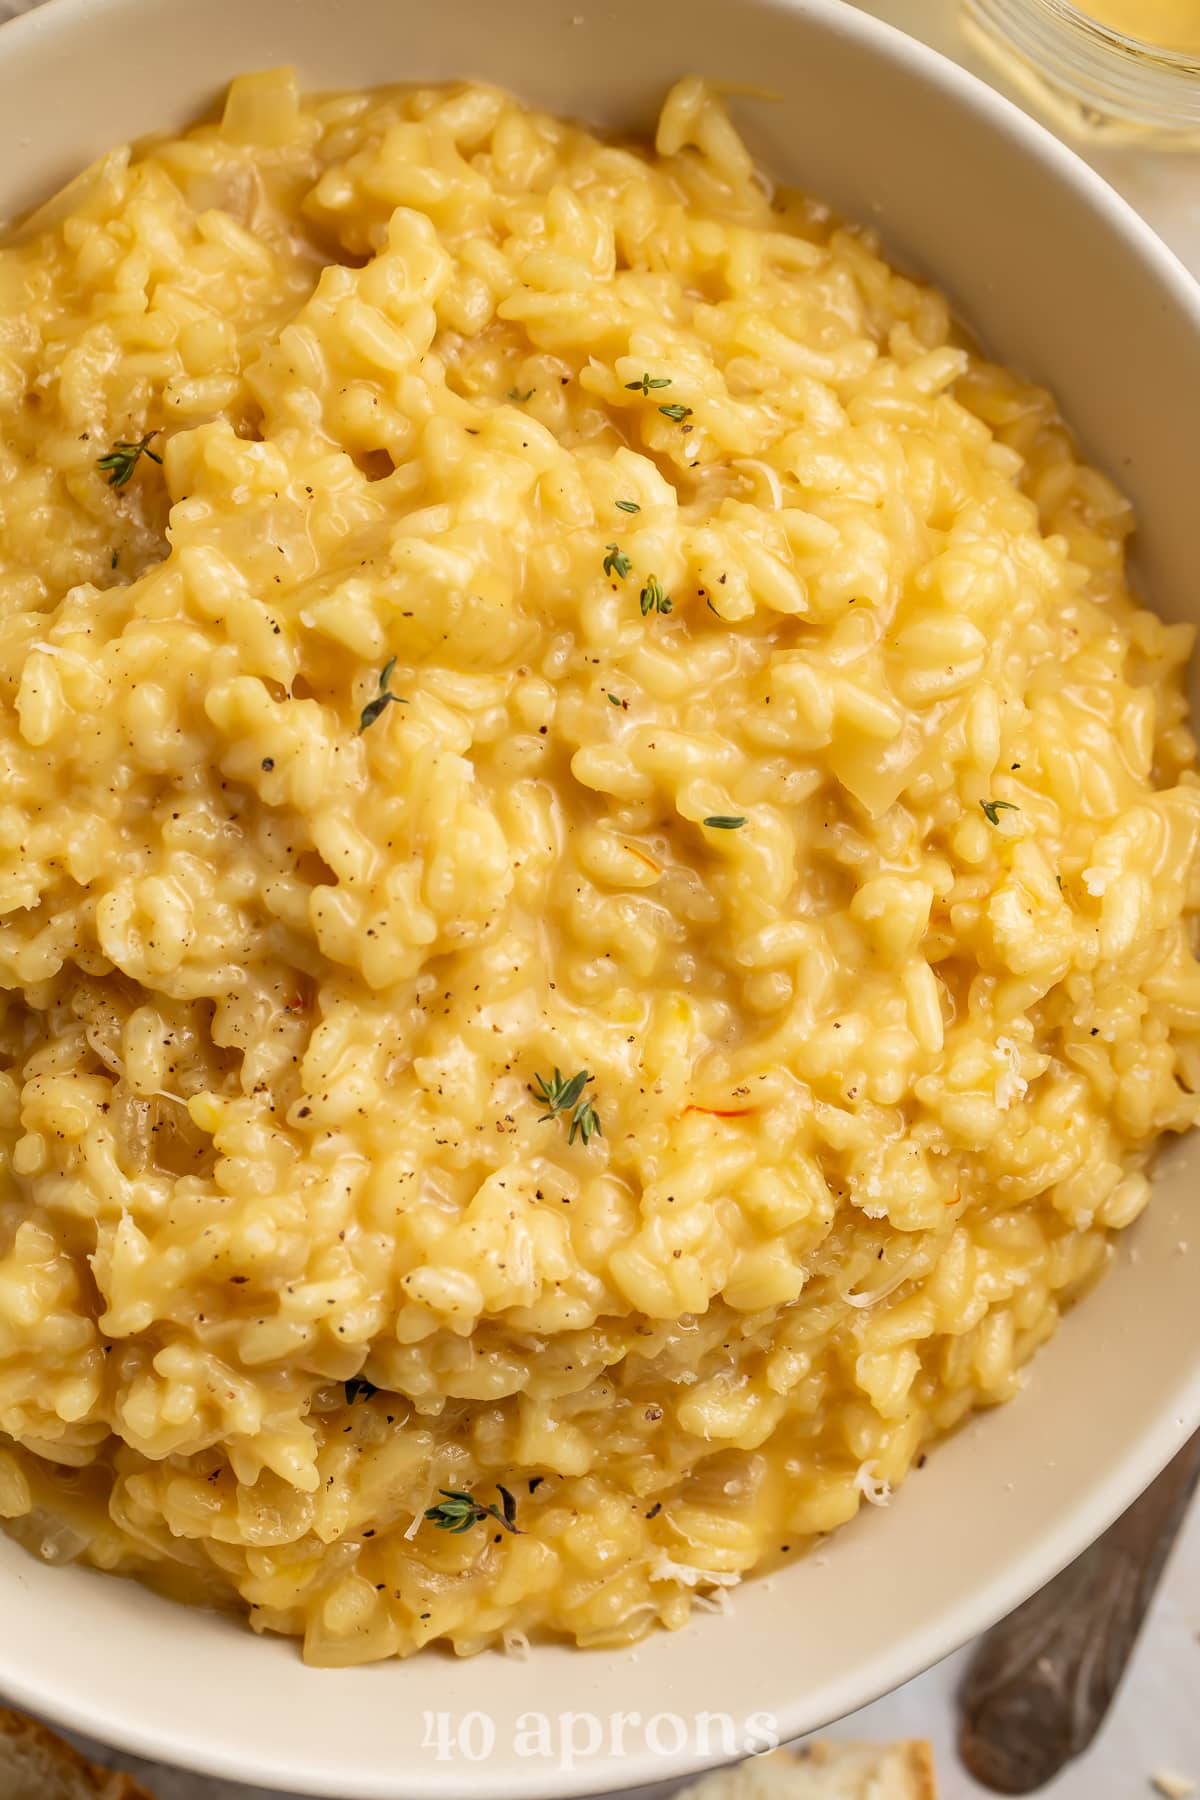 Four Cheese Risotto, The Authentic Italian Recipe - The Recipes Club